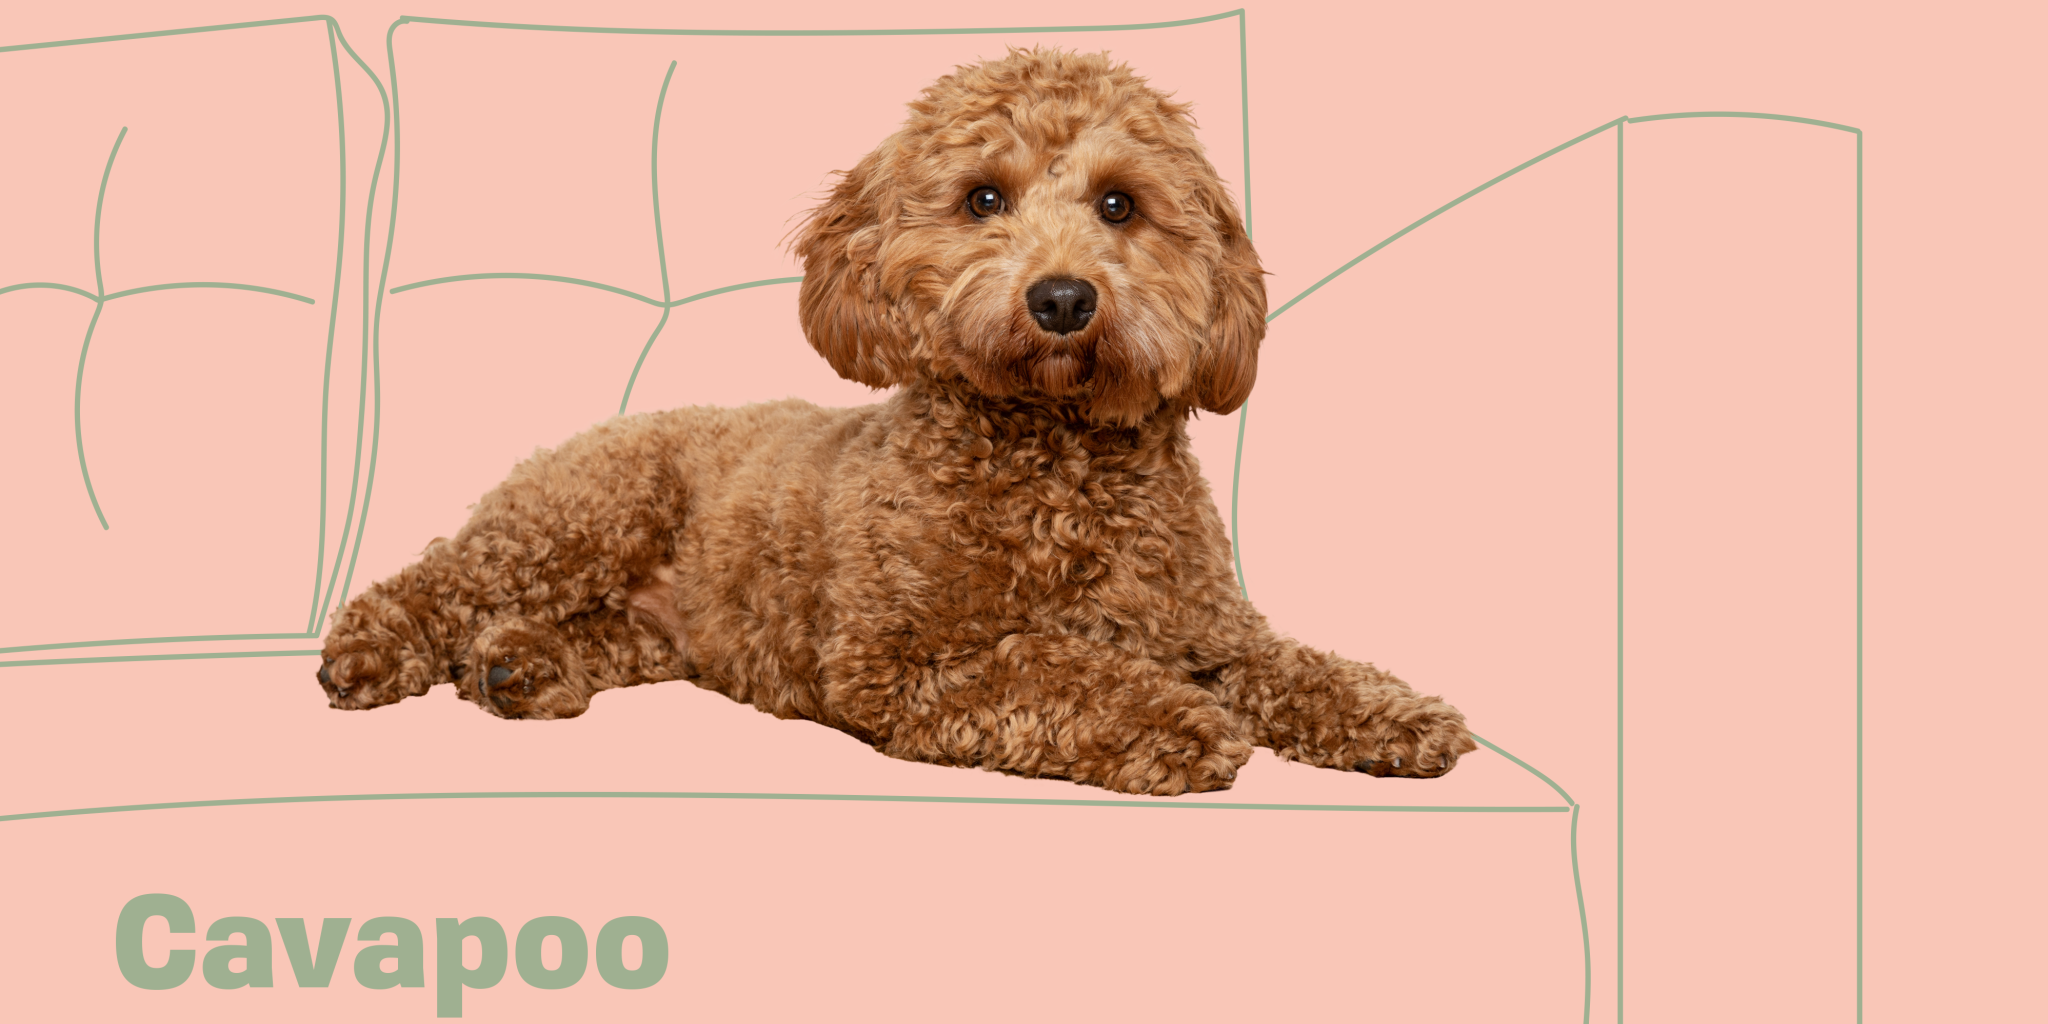 Get to Know the Cavapoo